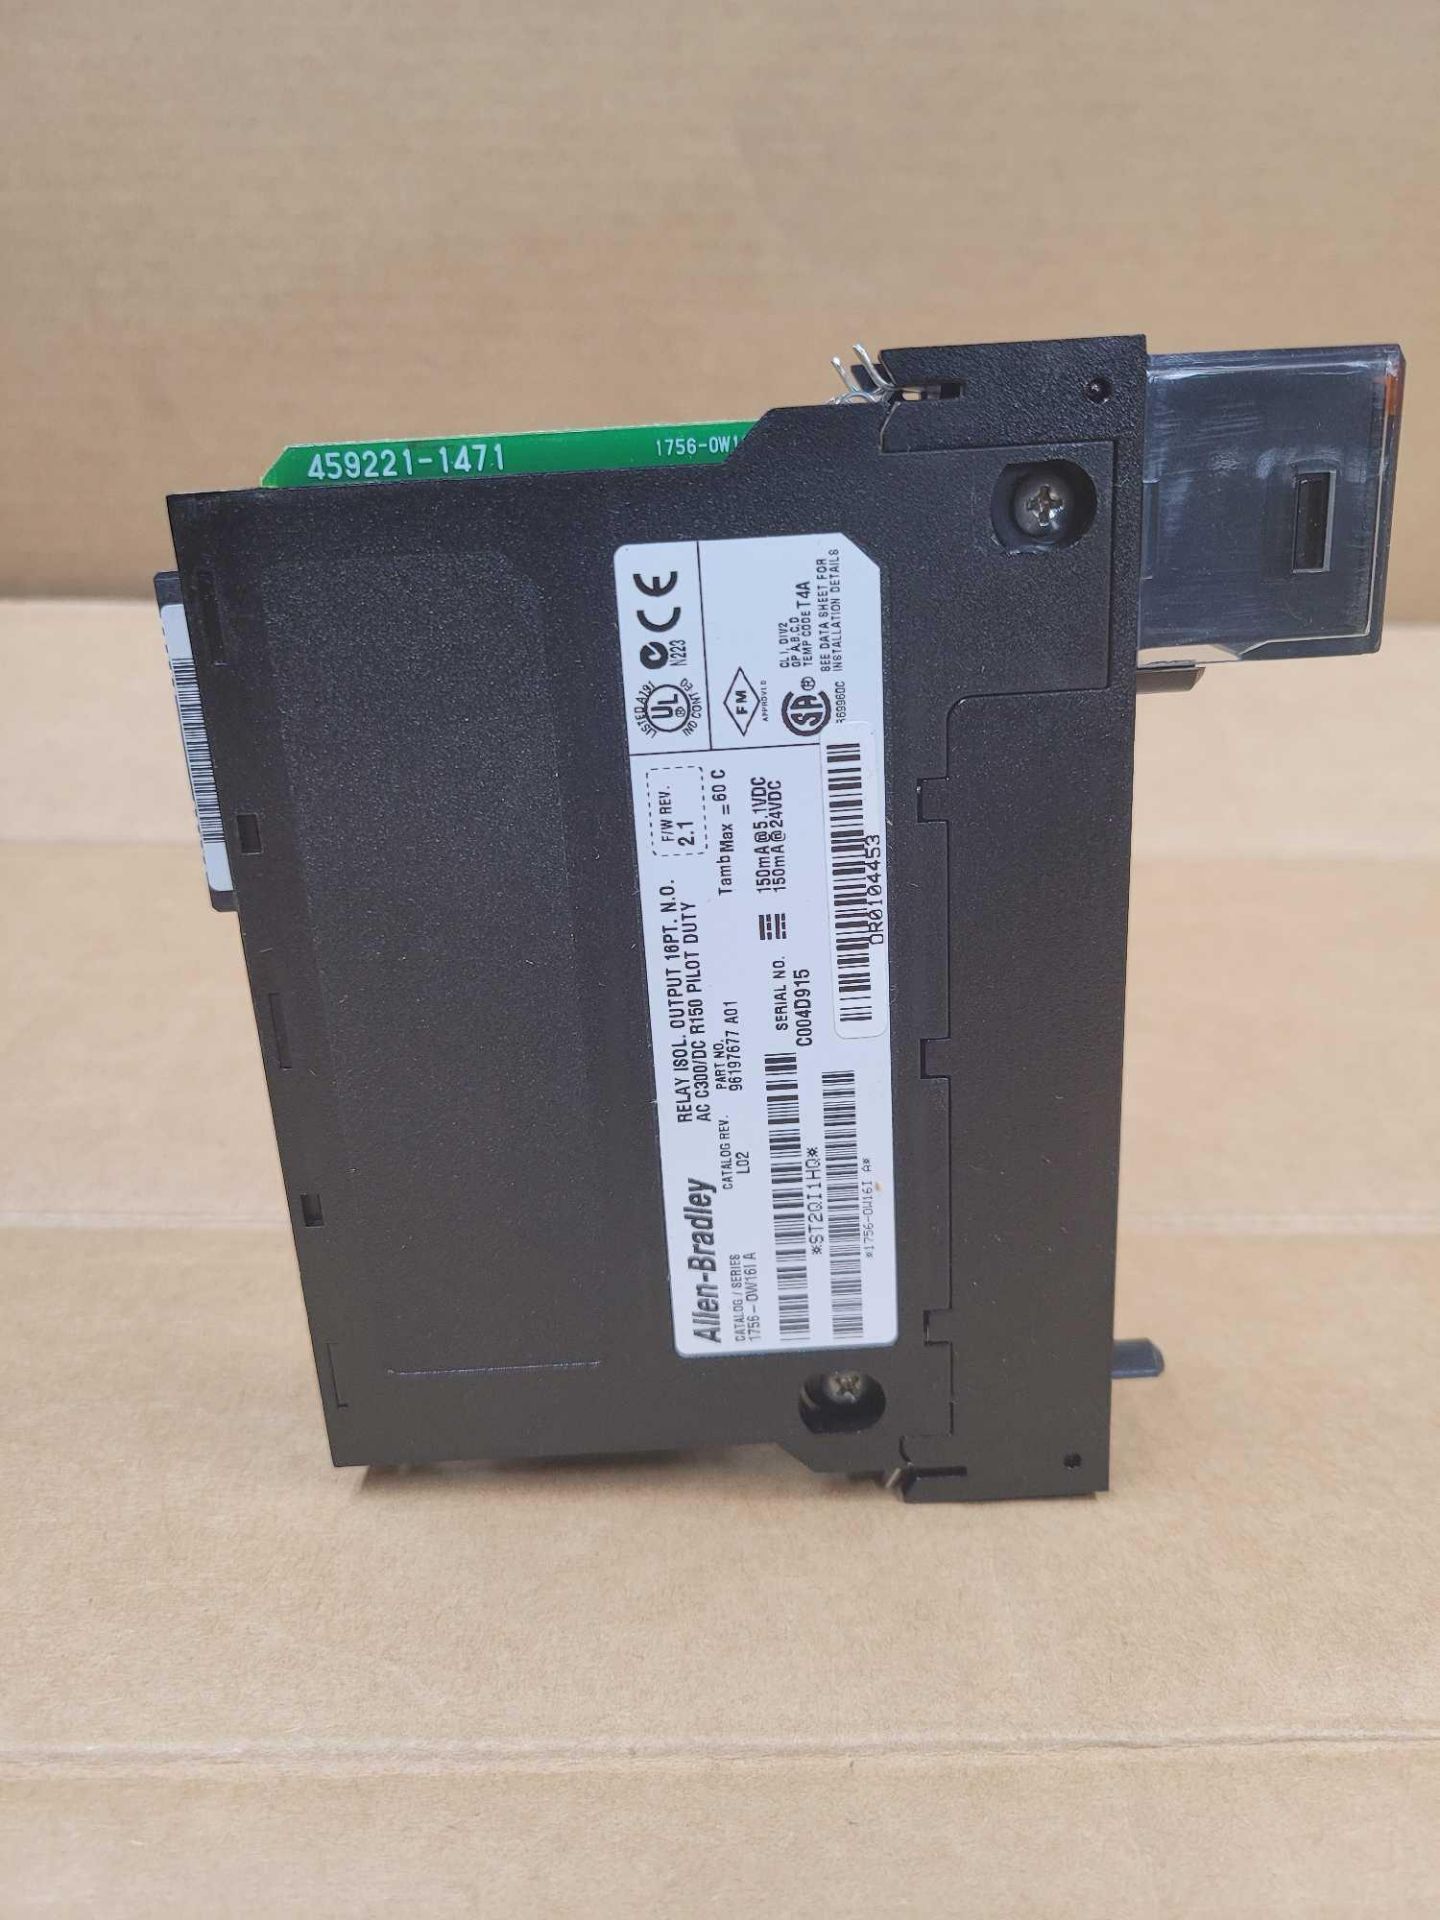 ALLEN BRADLEY 1756-OW16I / Series A Isolated Relay Output Module  /  Lot Weight: 0.6 lbs - Image 4 of 6